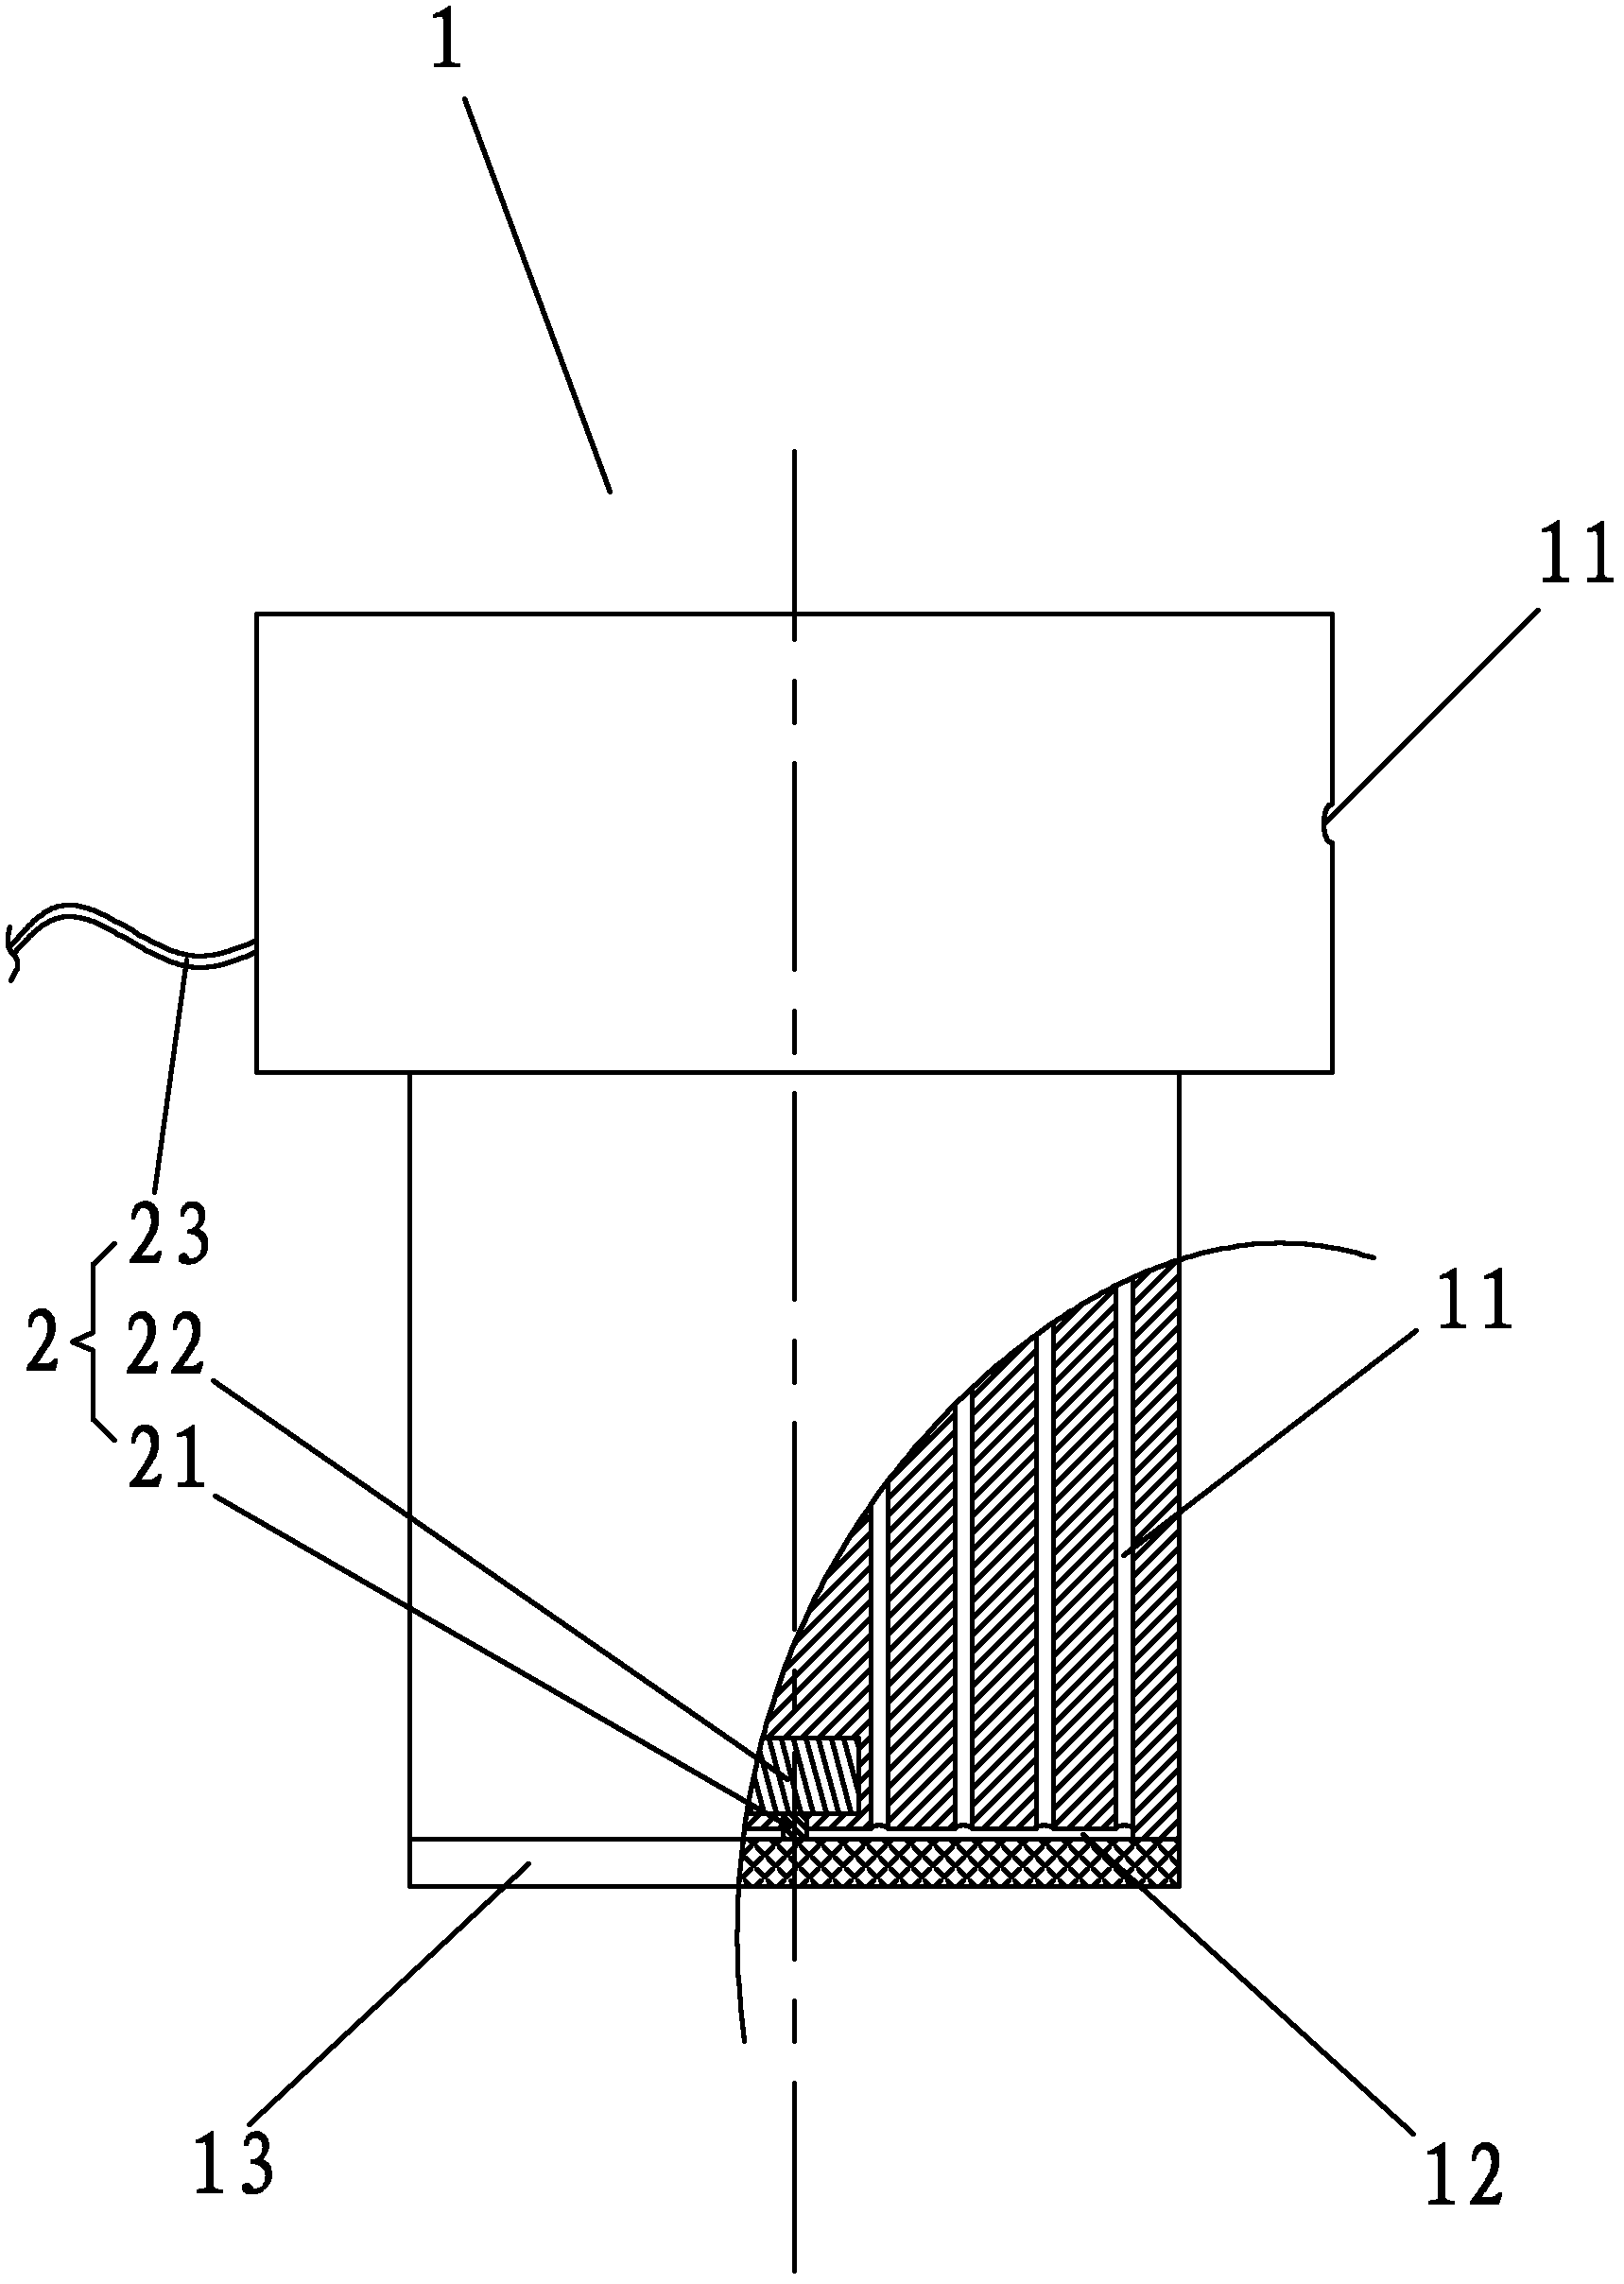 Pressure-bearing type acoustic detection probe used for engineering